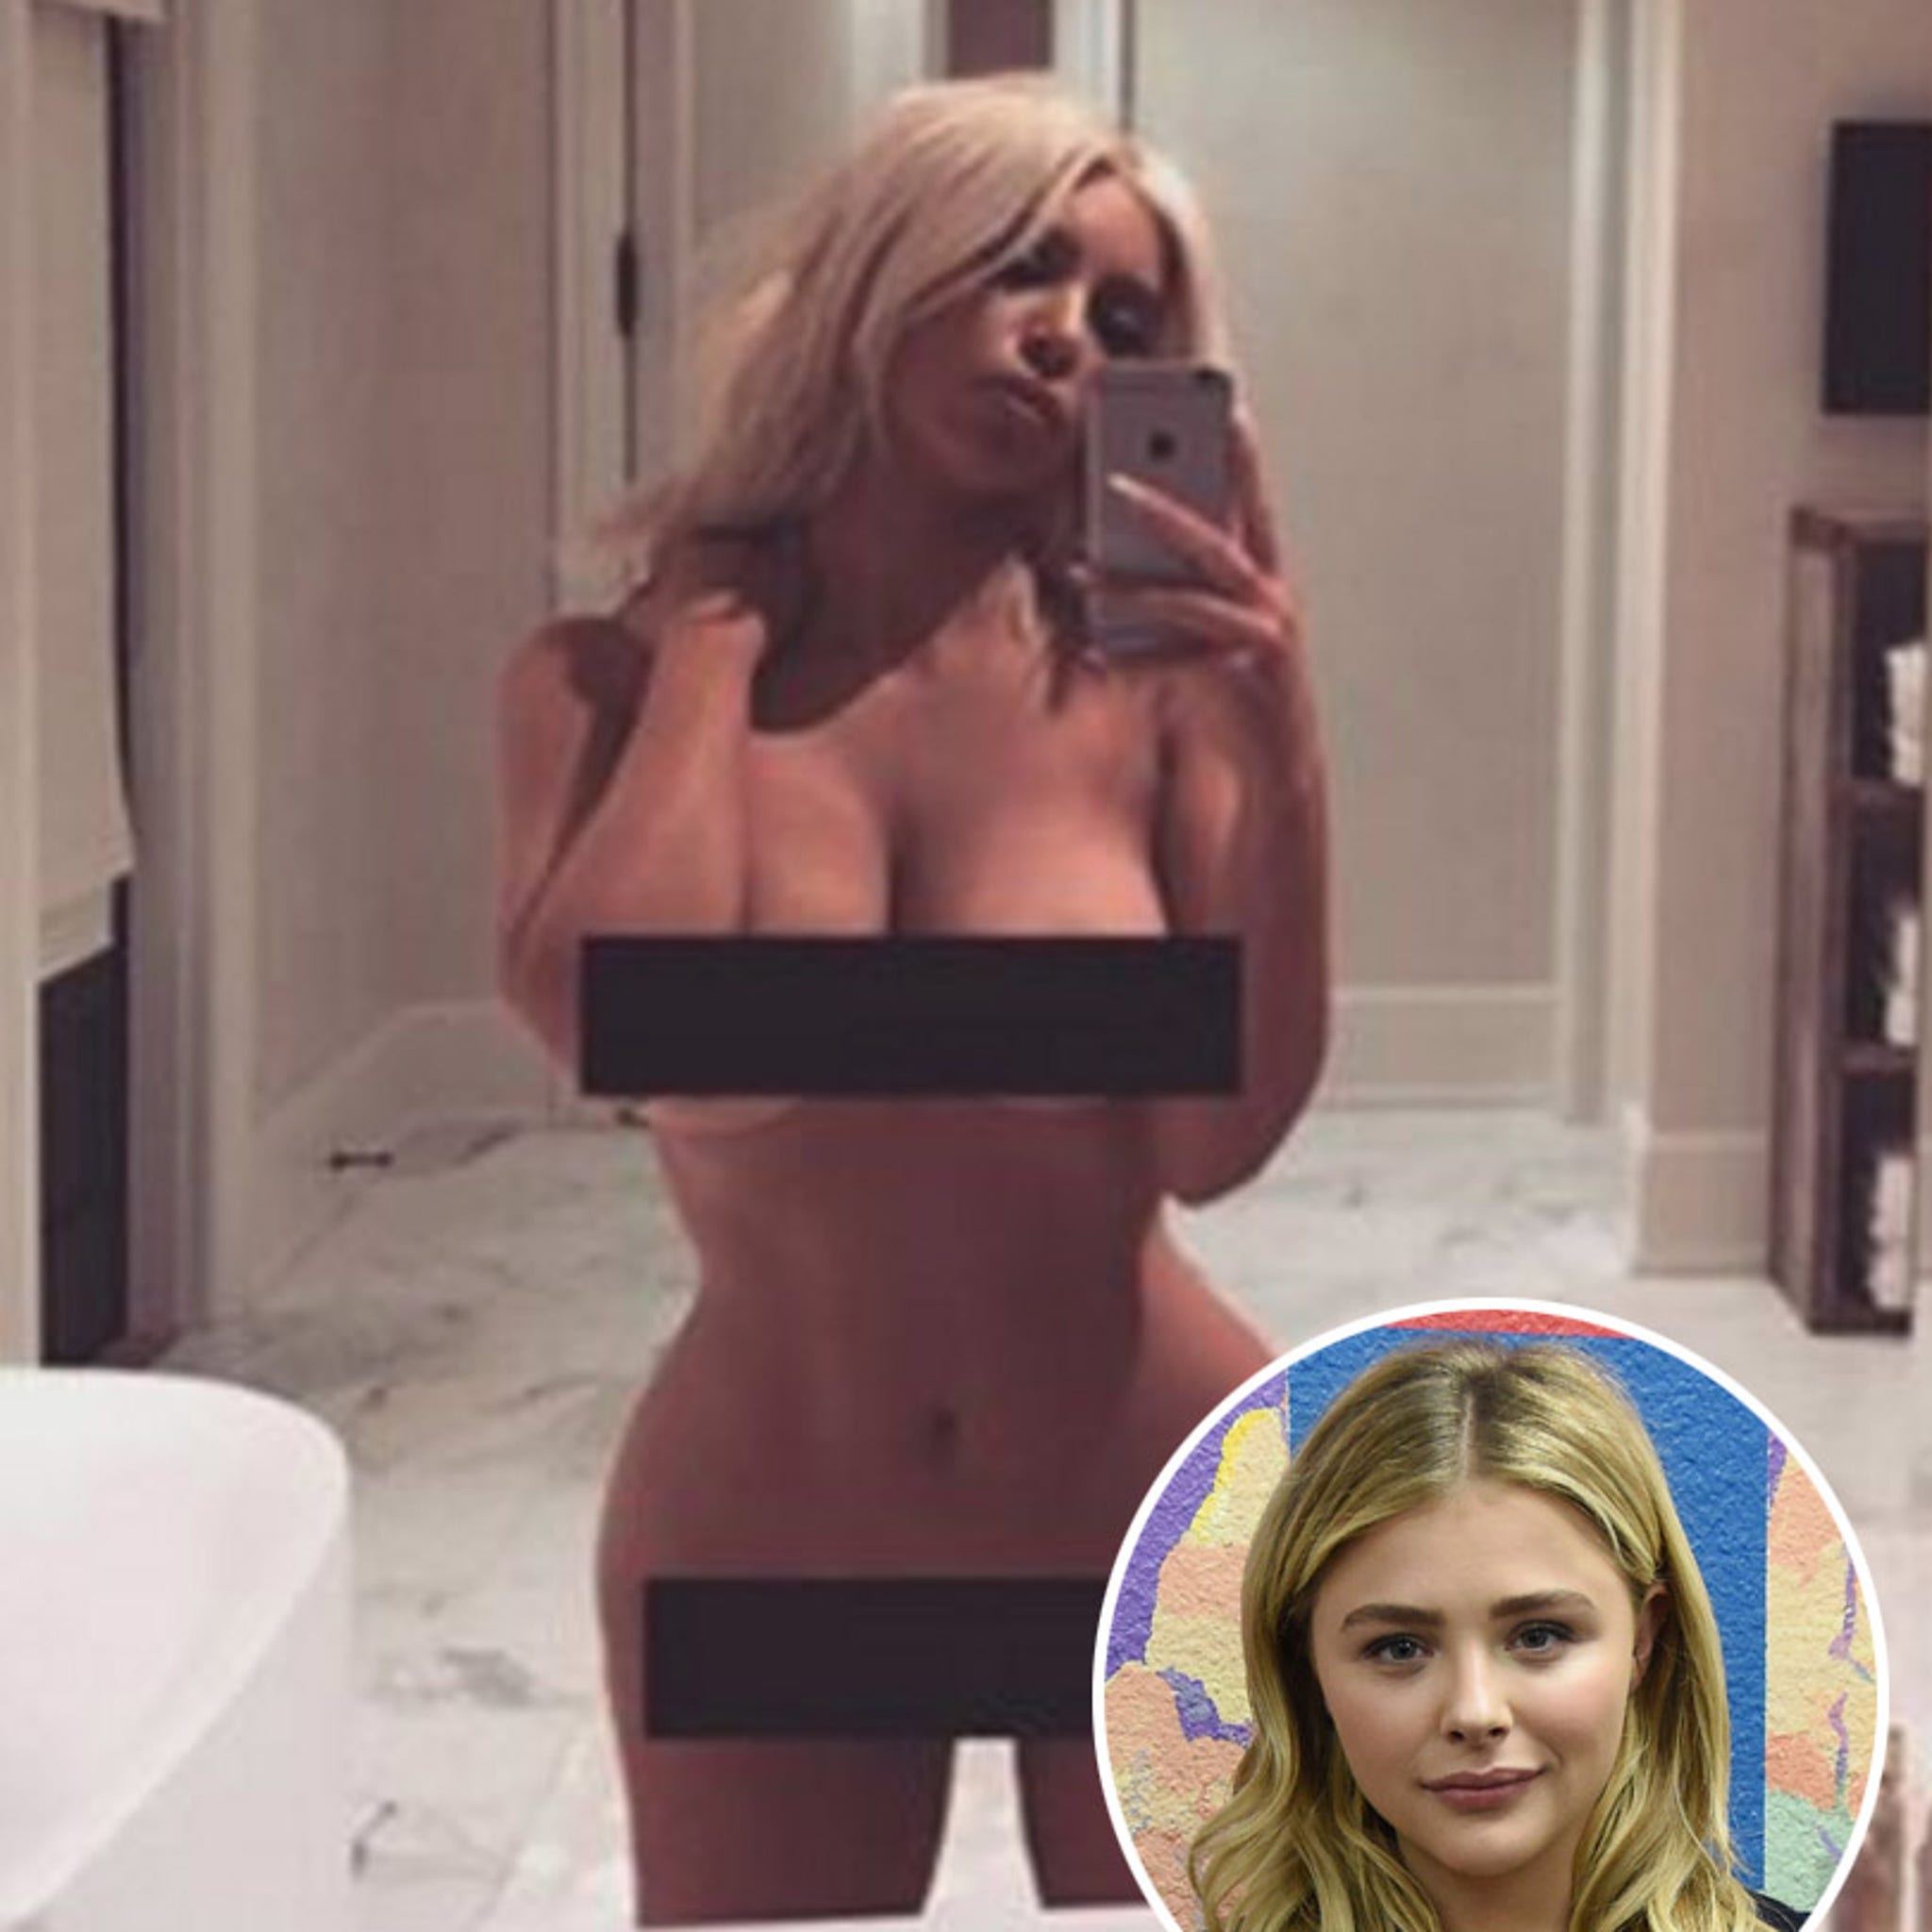 cole sparks recommends Has Chloe Grace Moretz Ever Been Nude